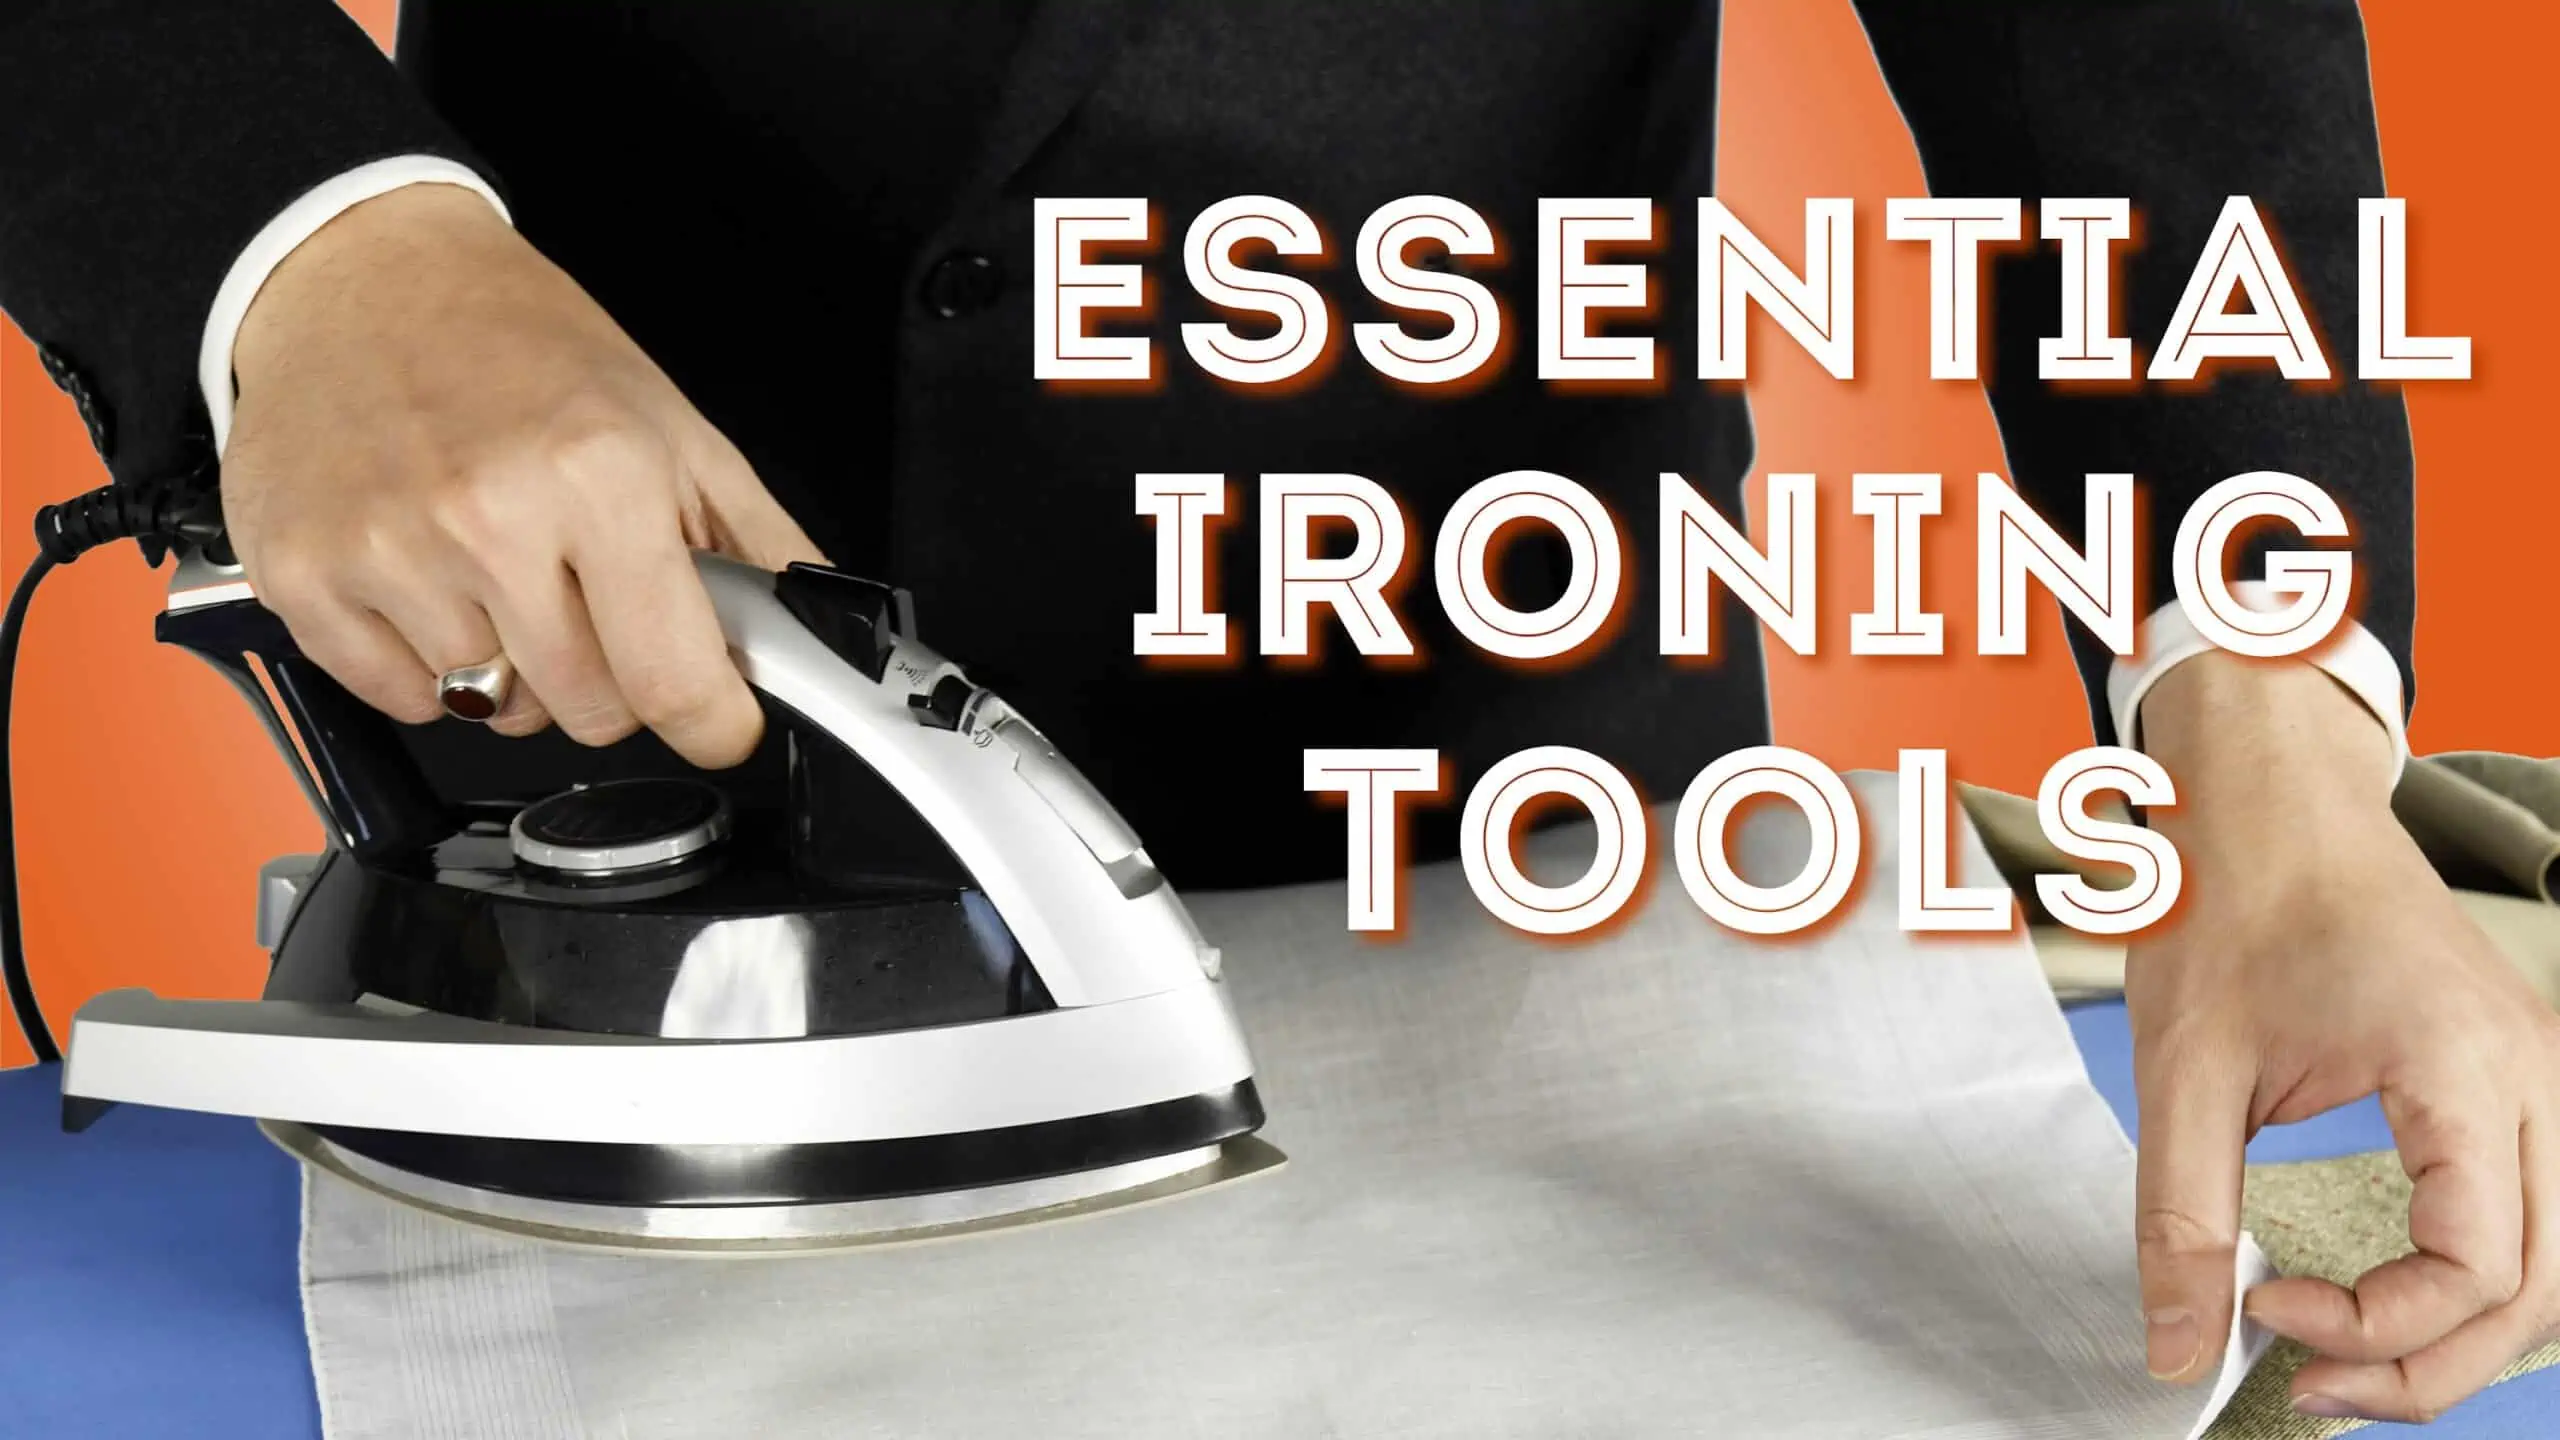 Essential Ironing Tools scaled